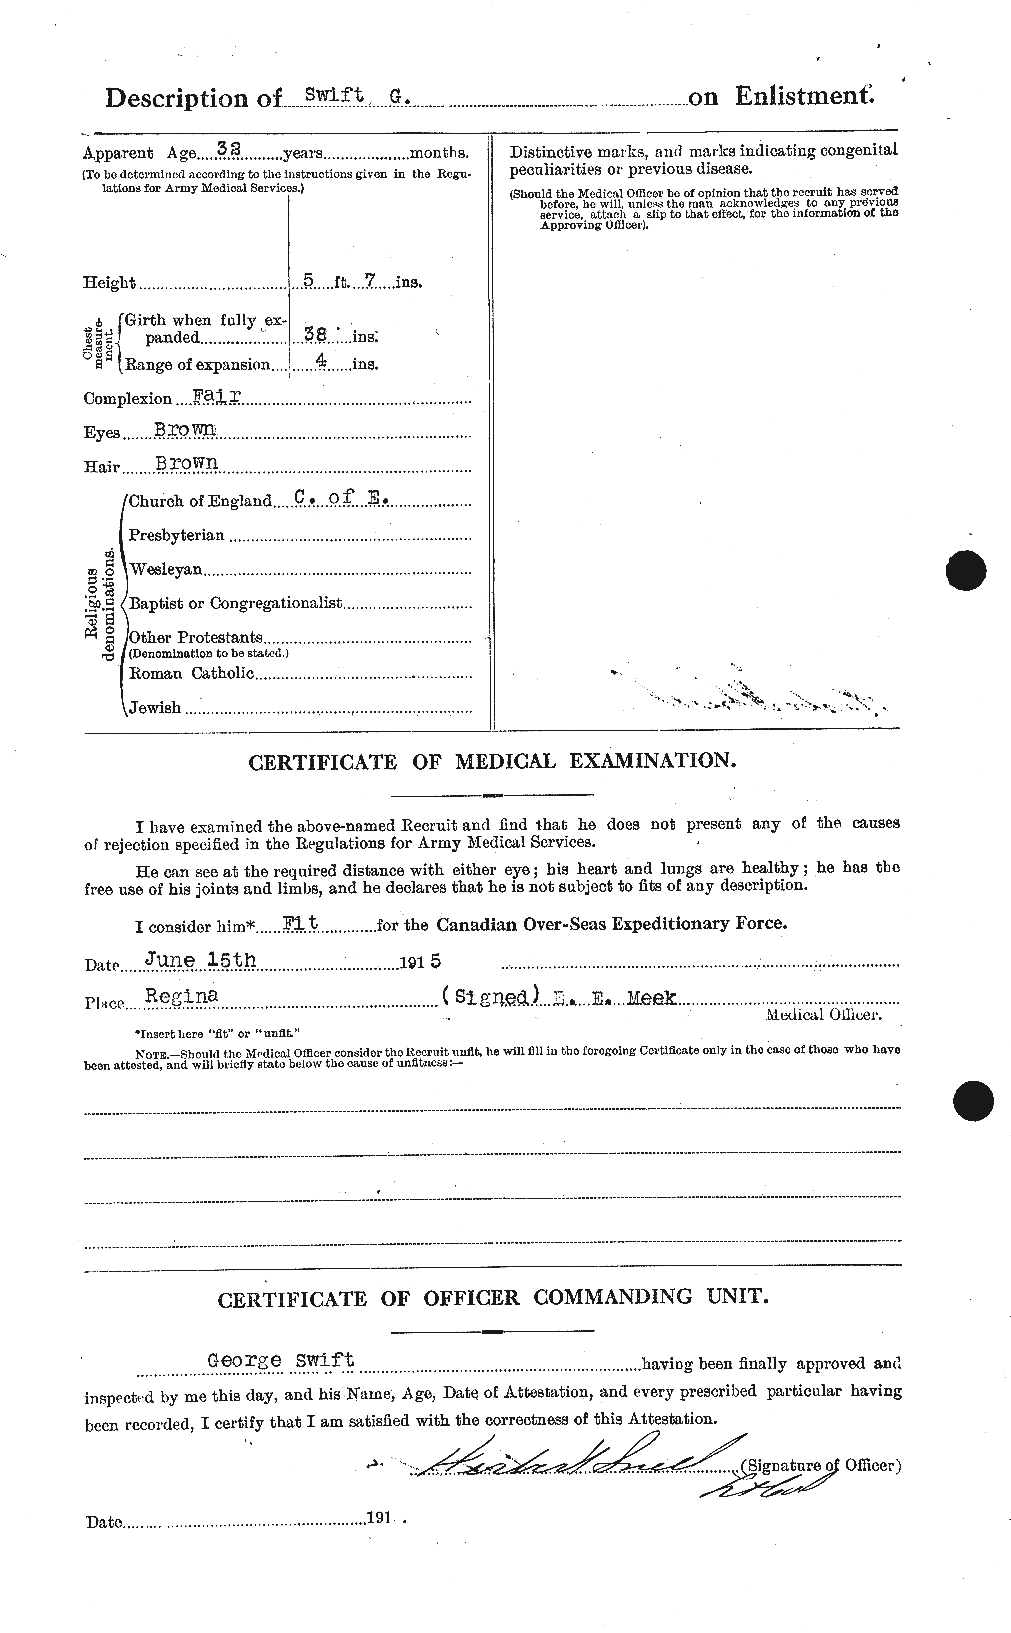 Personnel Records of the First World War - CEF 128586b